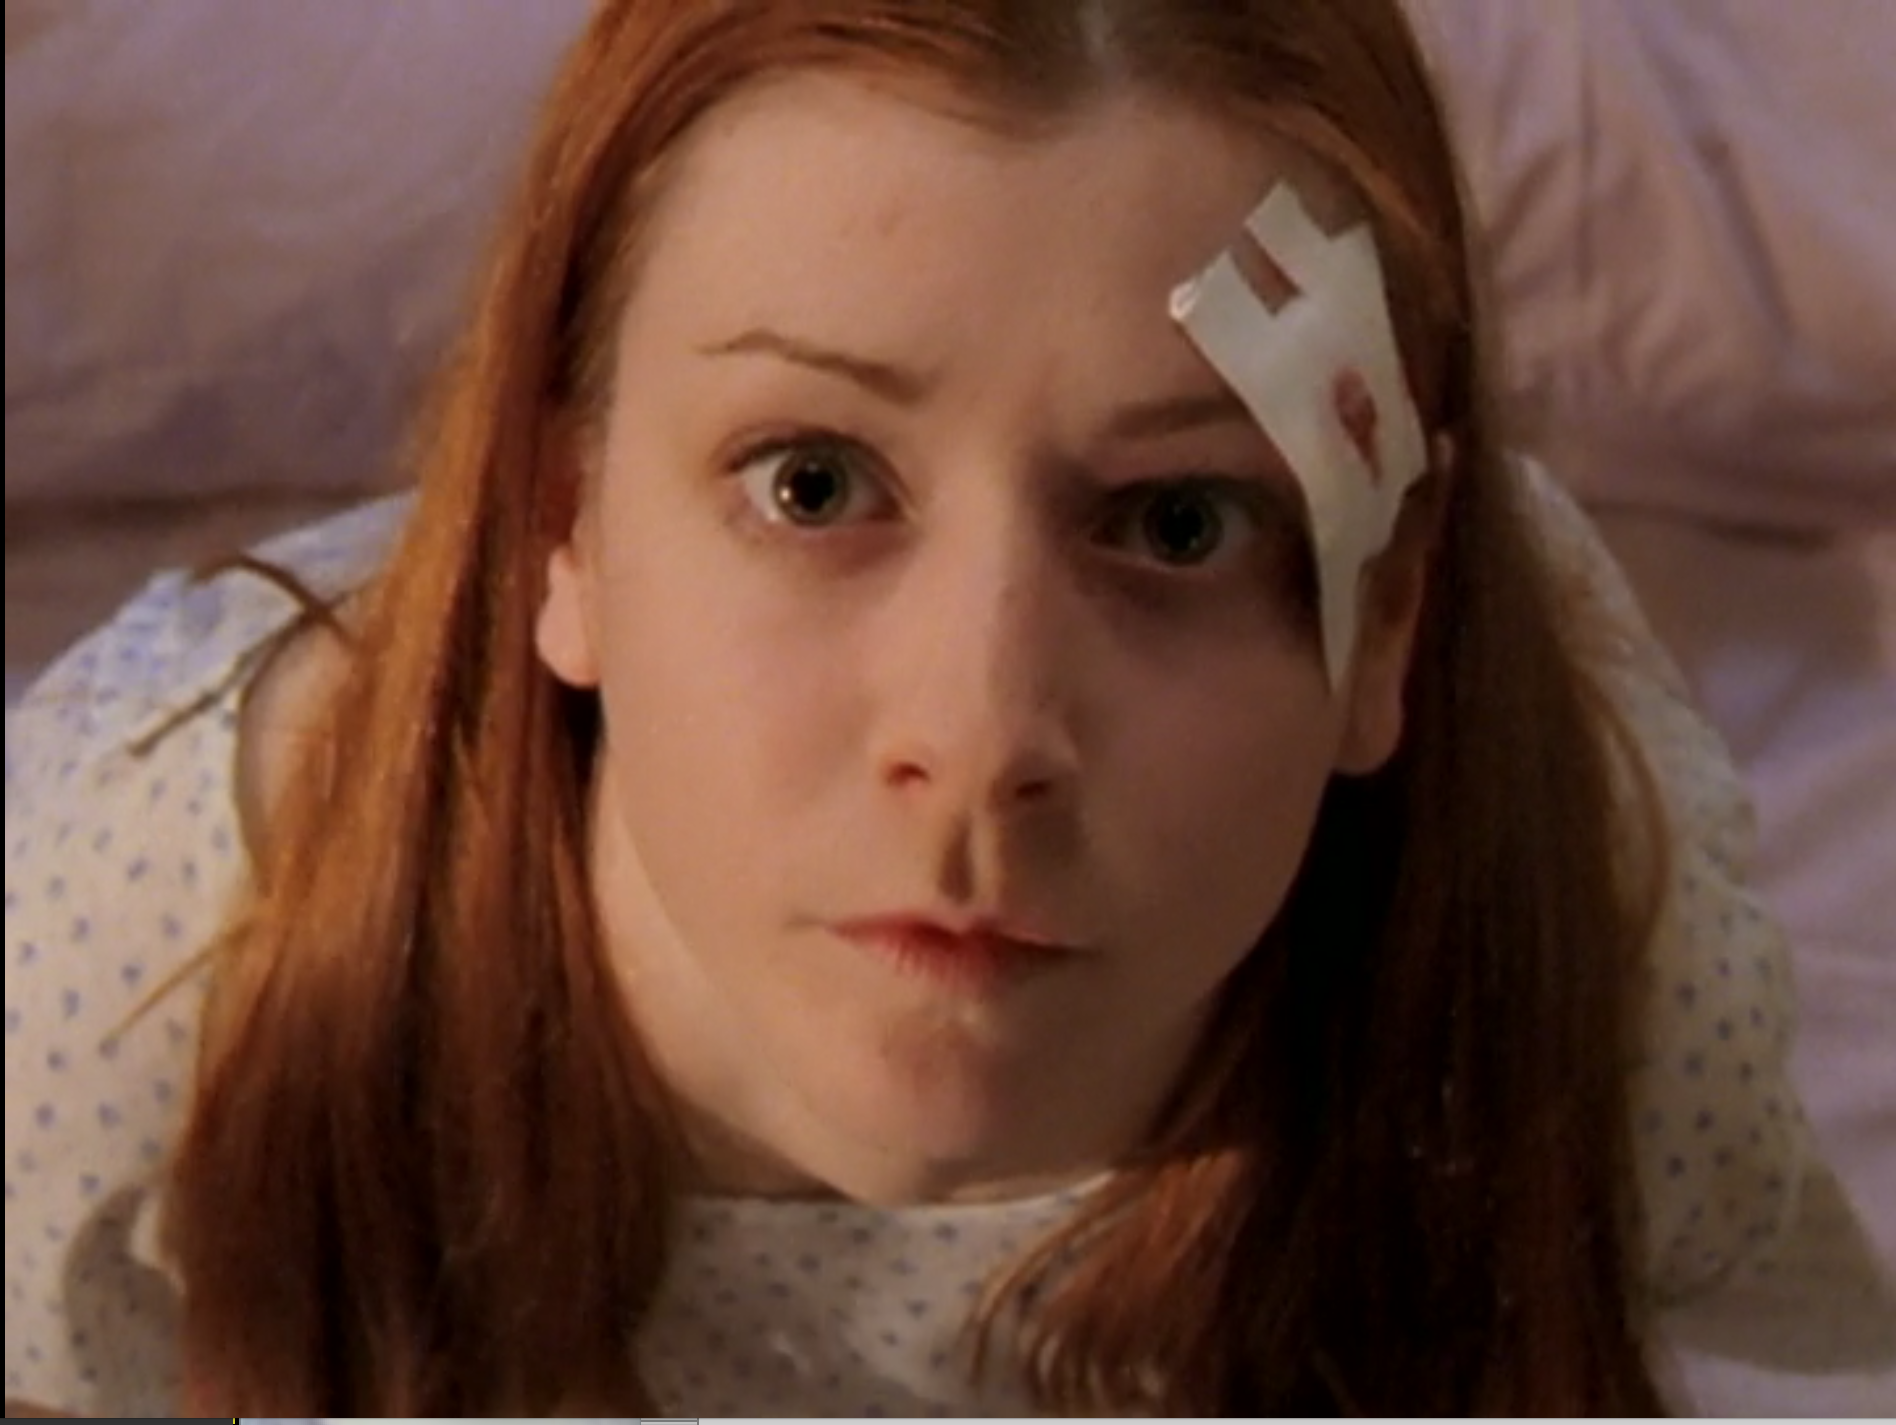 Becoming - Alyson Hannigan as Willow